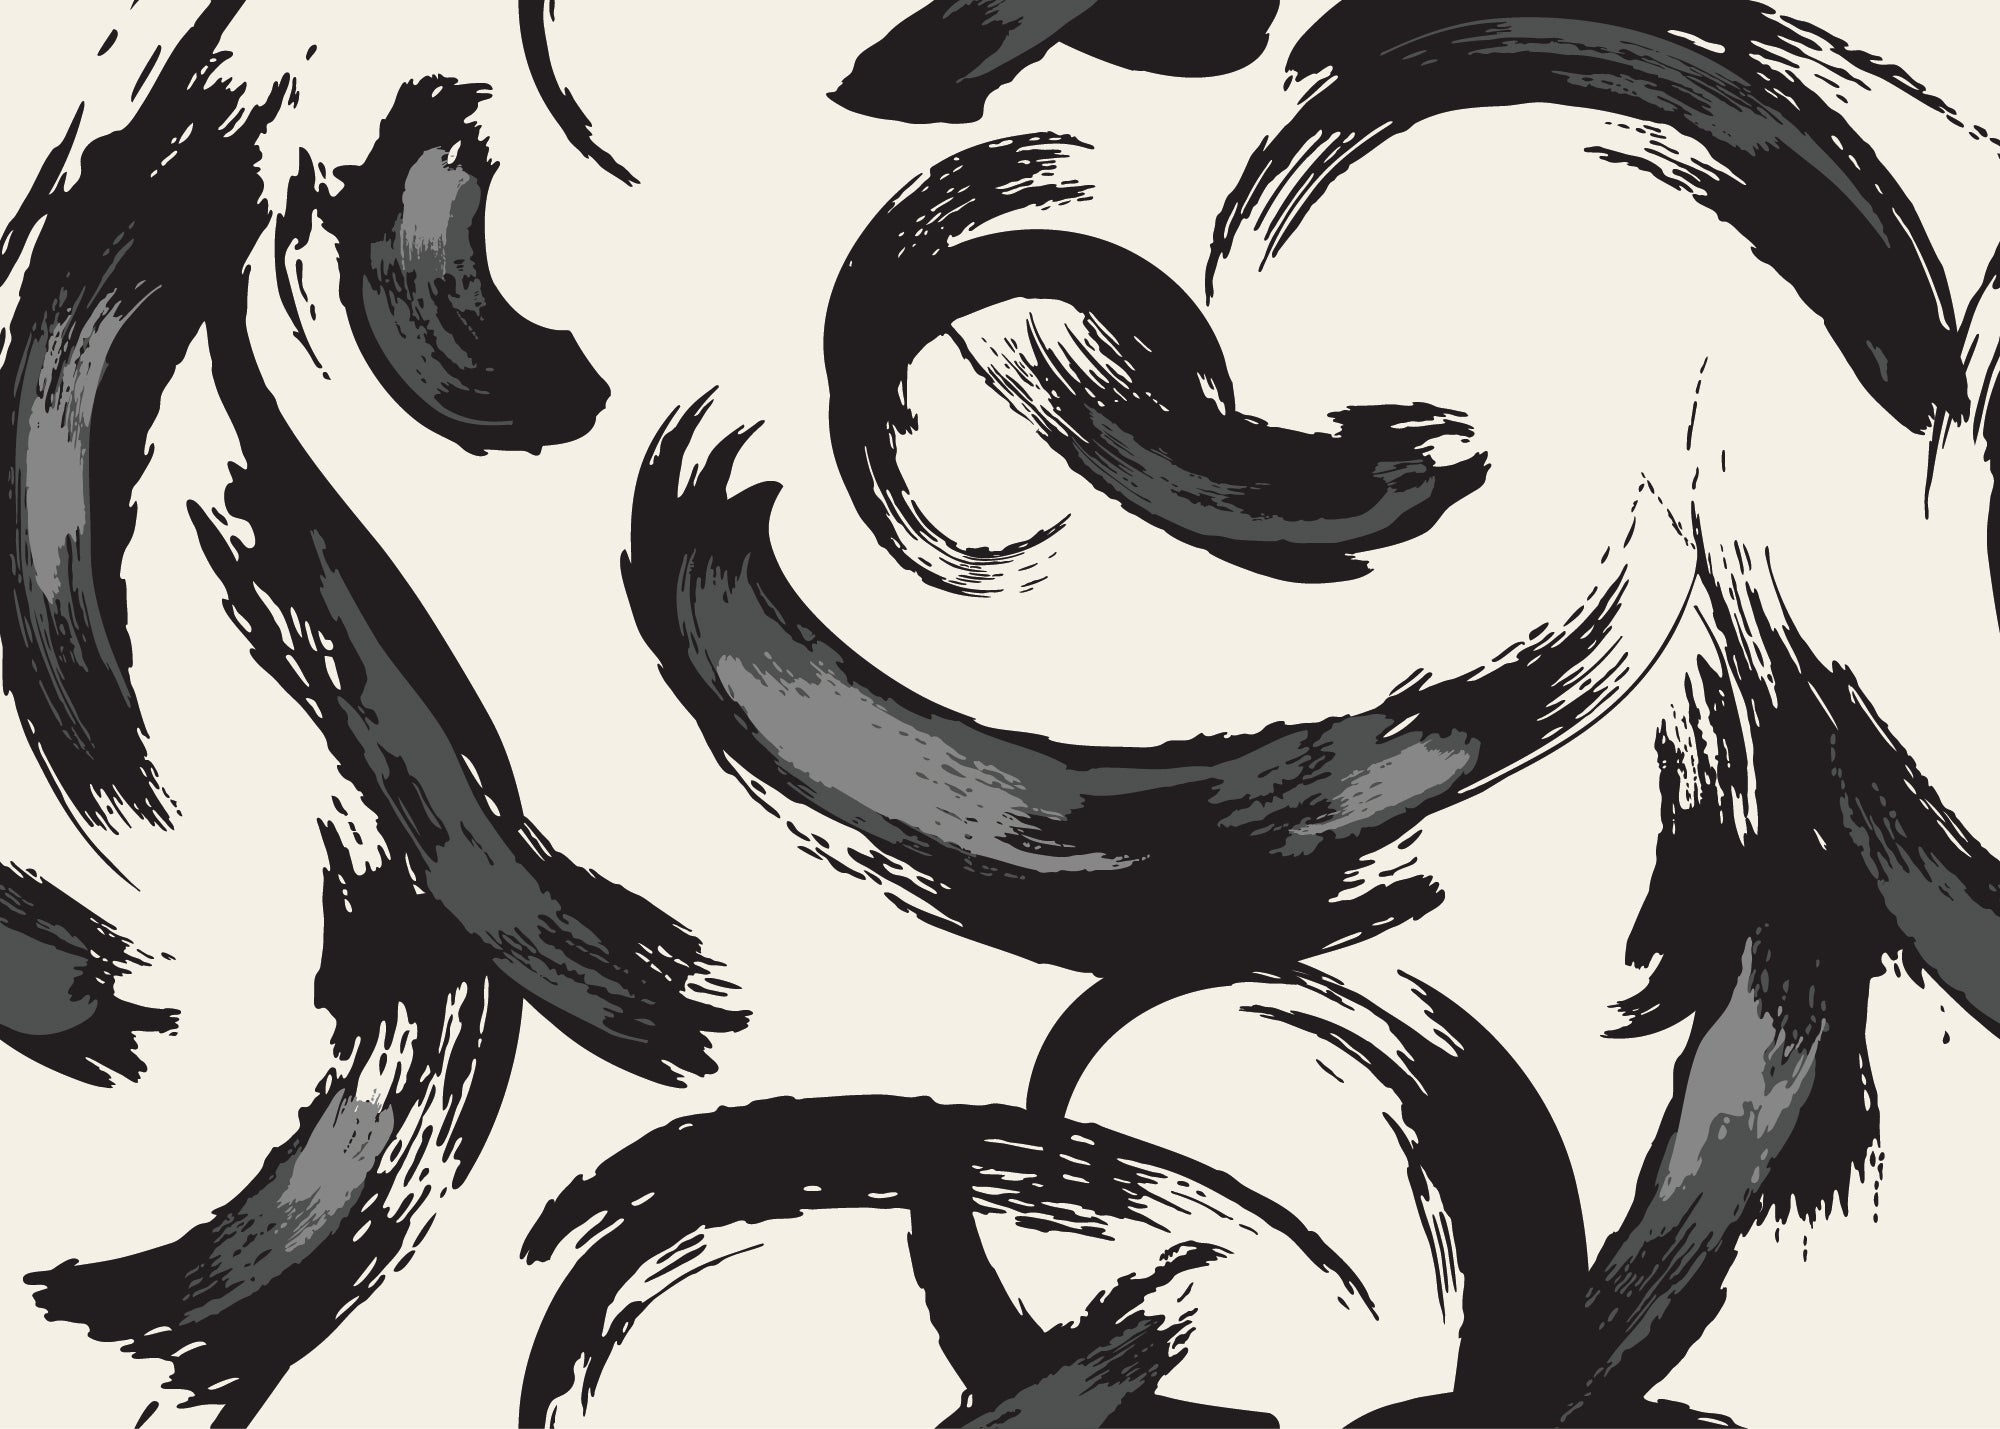 Gergo Black and Cream Brush Stroke Design by Wallpaper Mural as featured by @homeofchelle